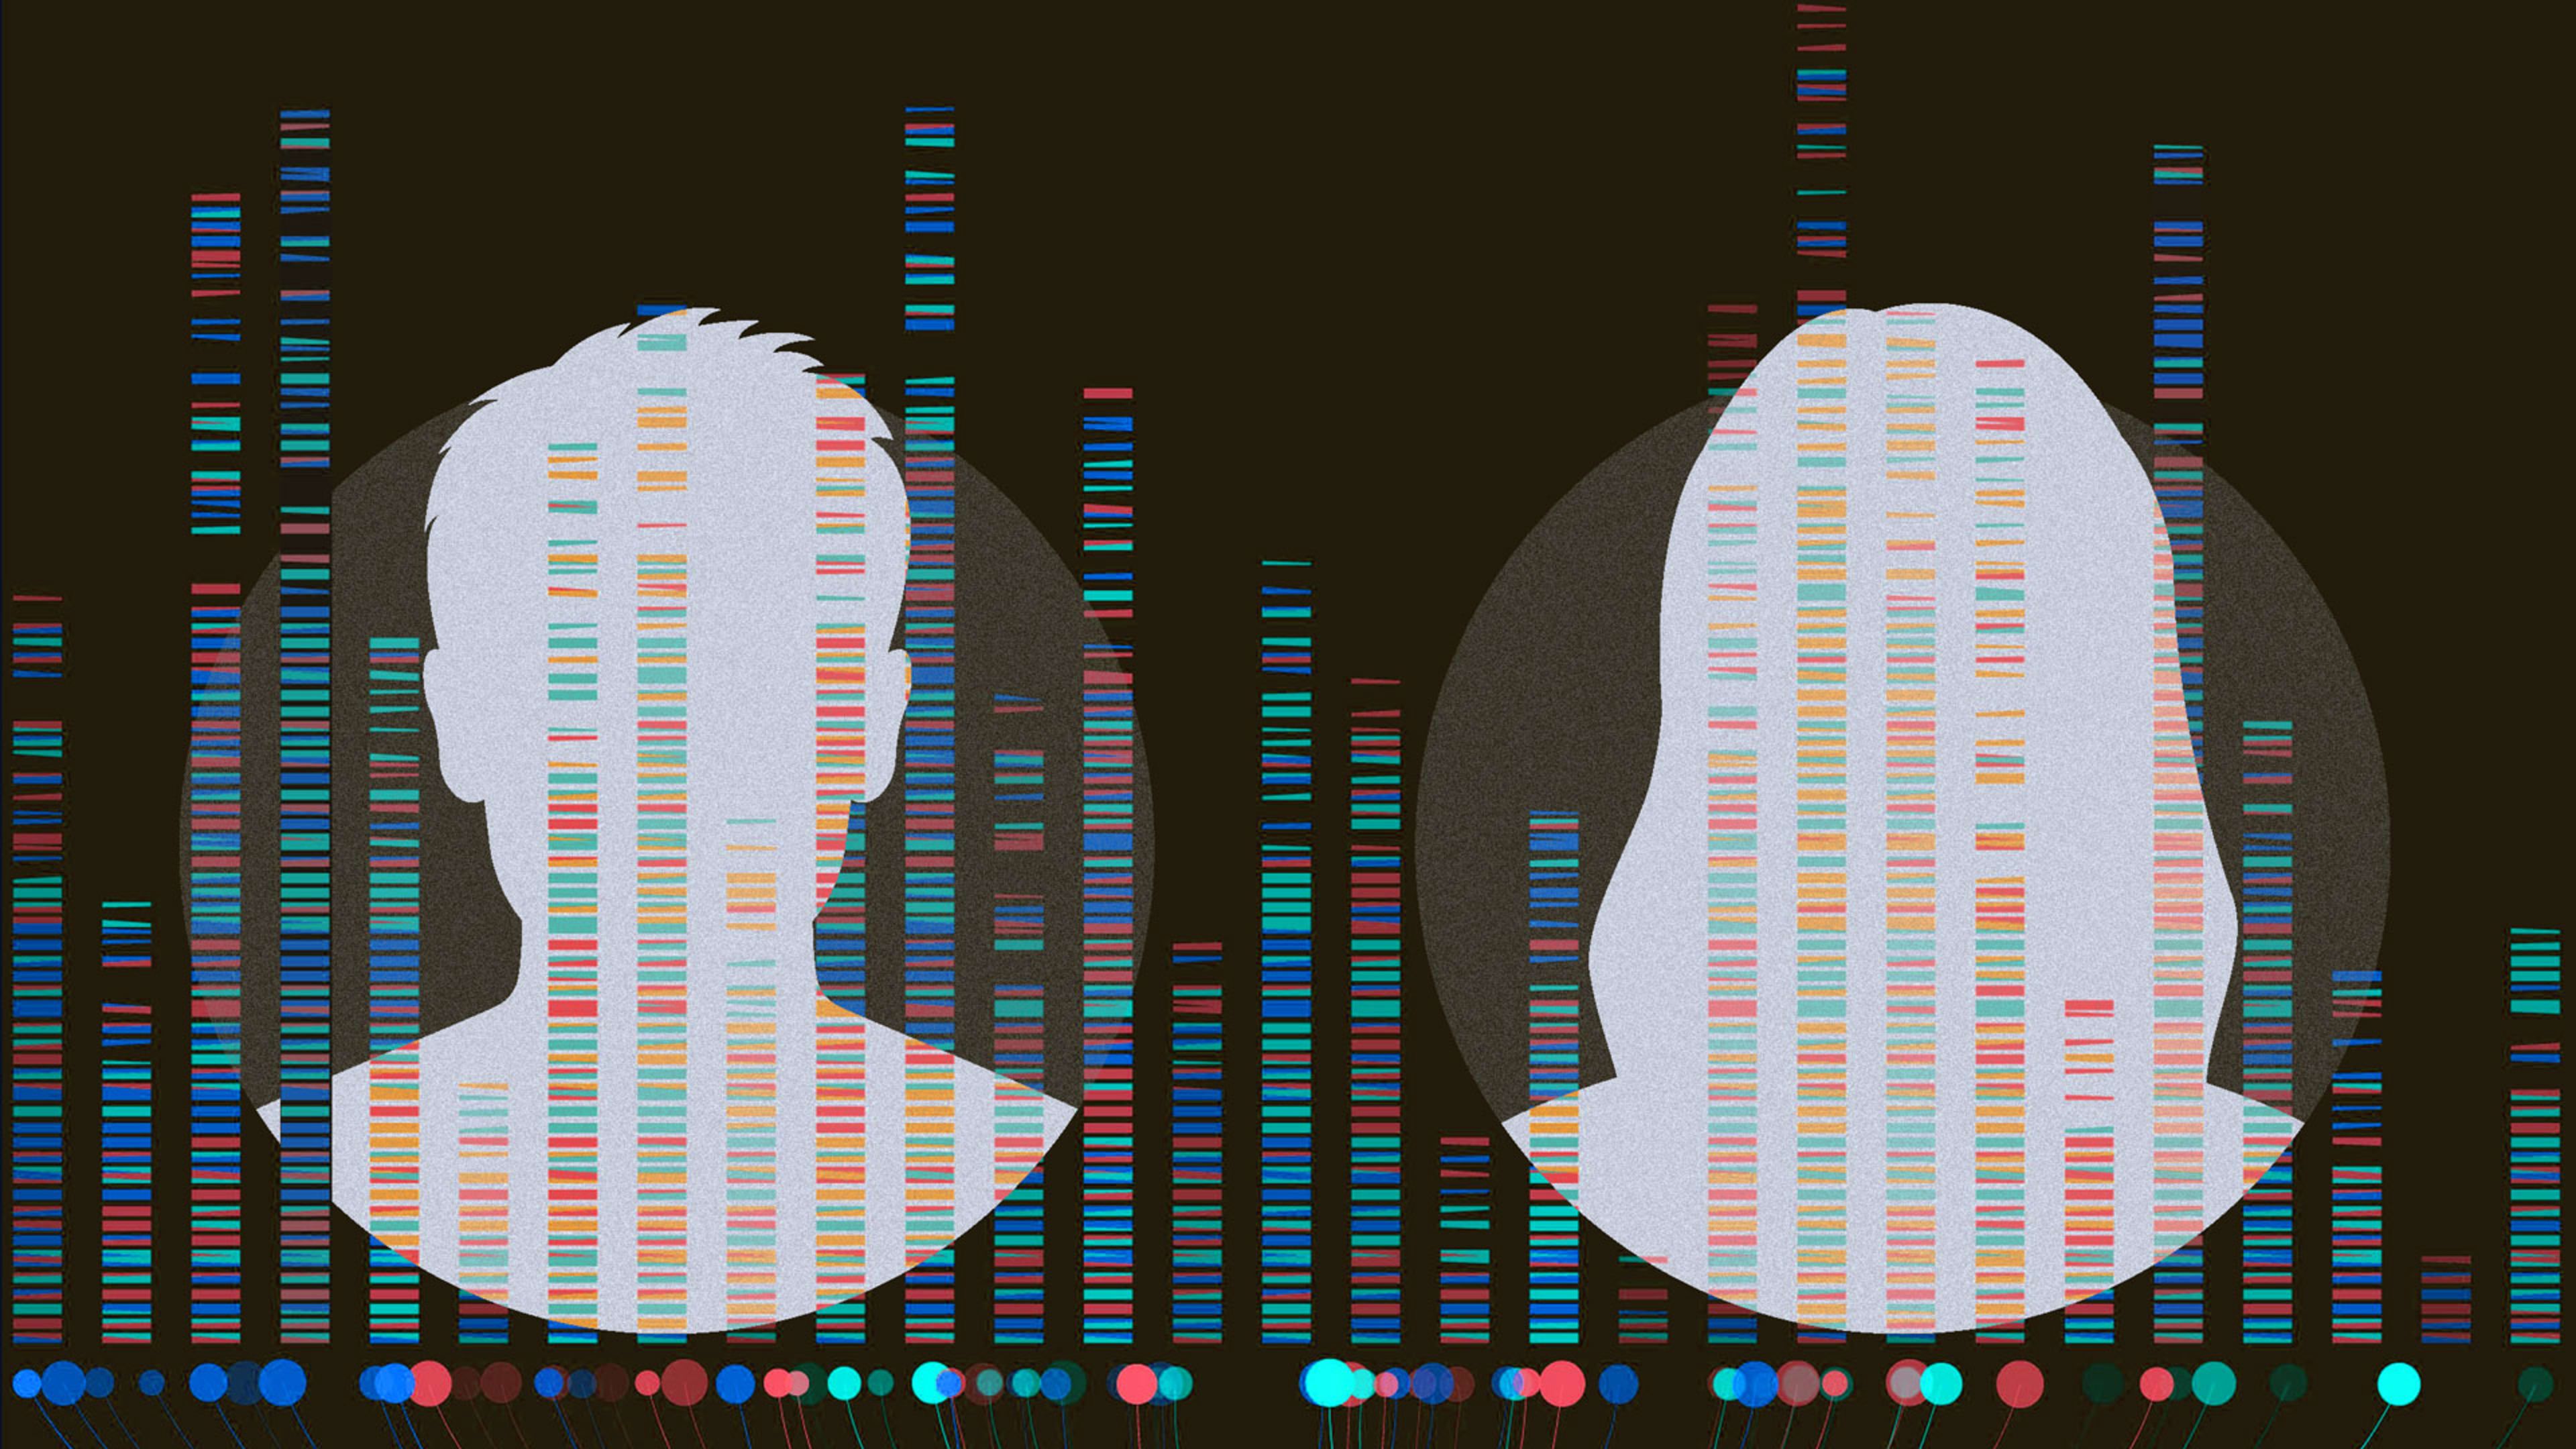 23andMe’s next stage? Using DNA data to help you make better health choices